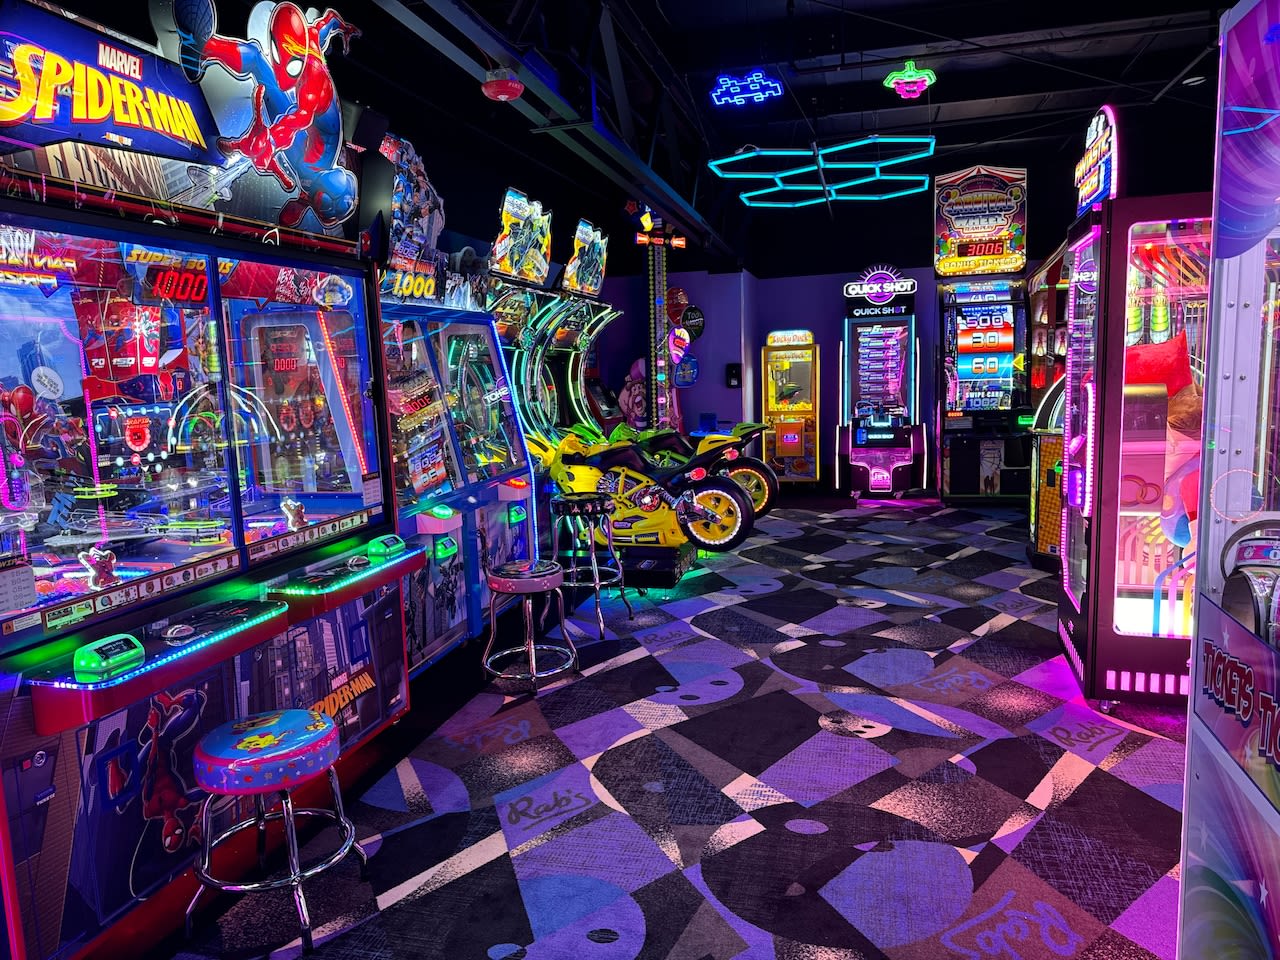 This Staten Island bowling alley is introducing a new, state-of-the-art arcade